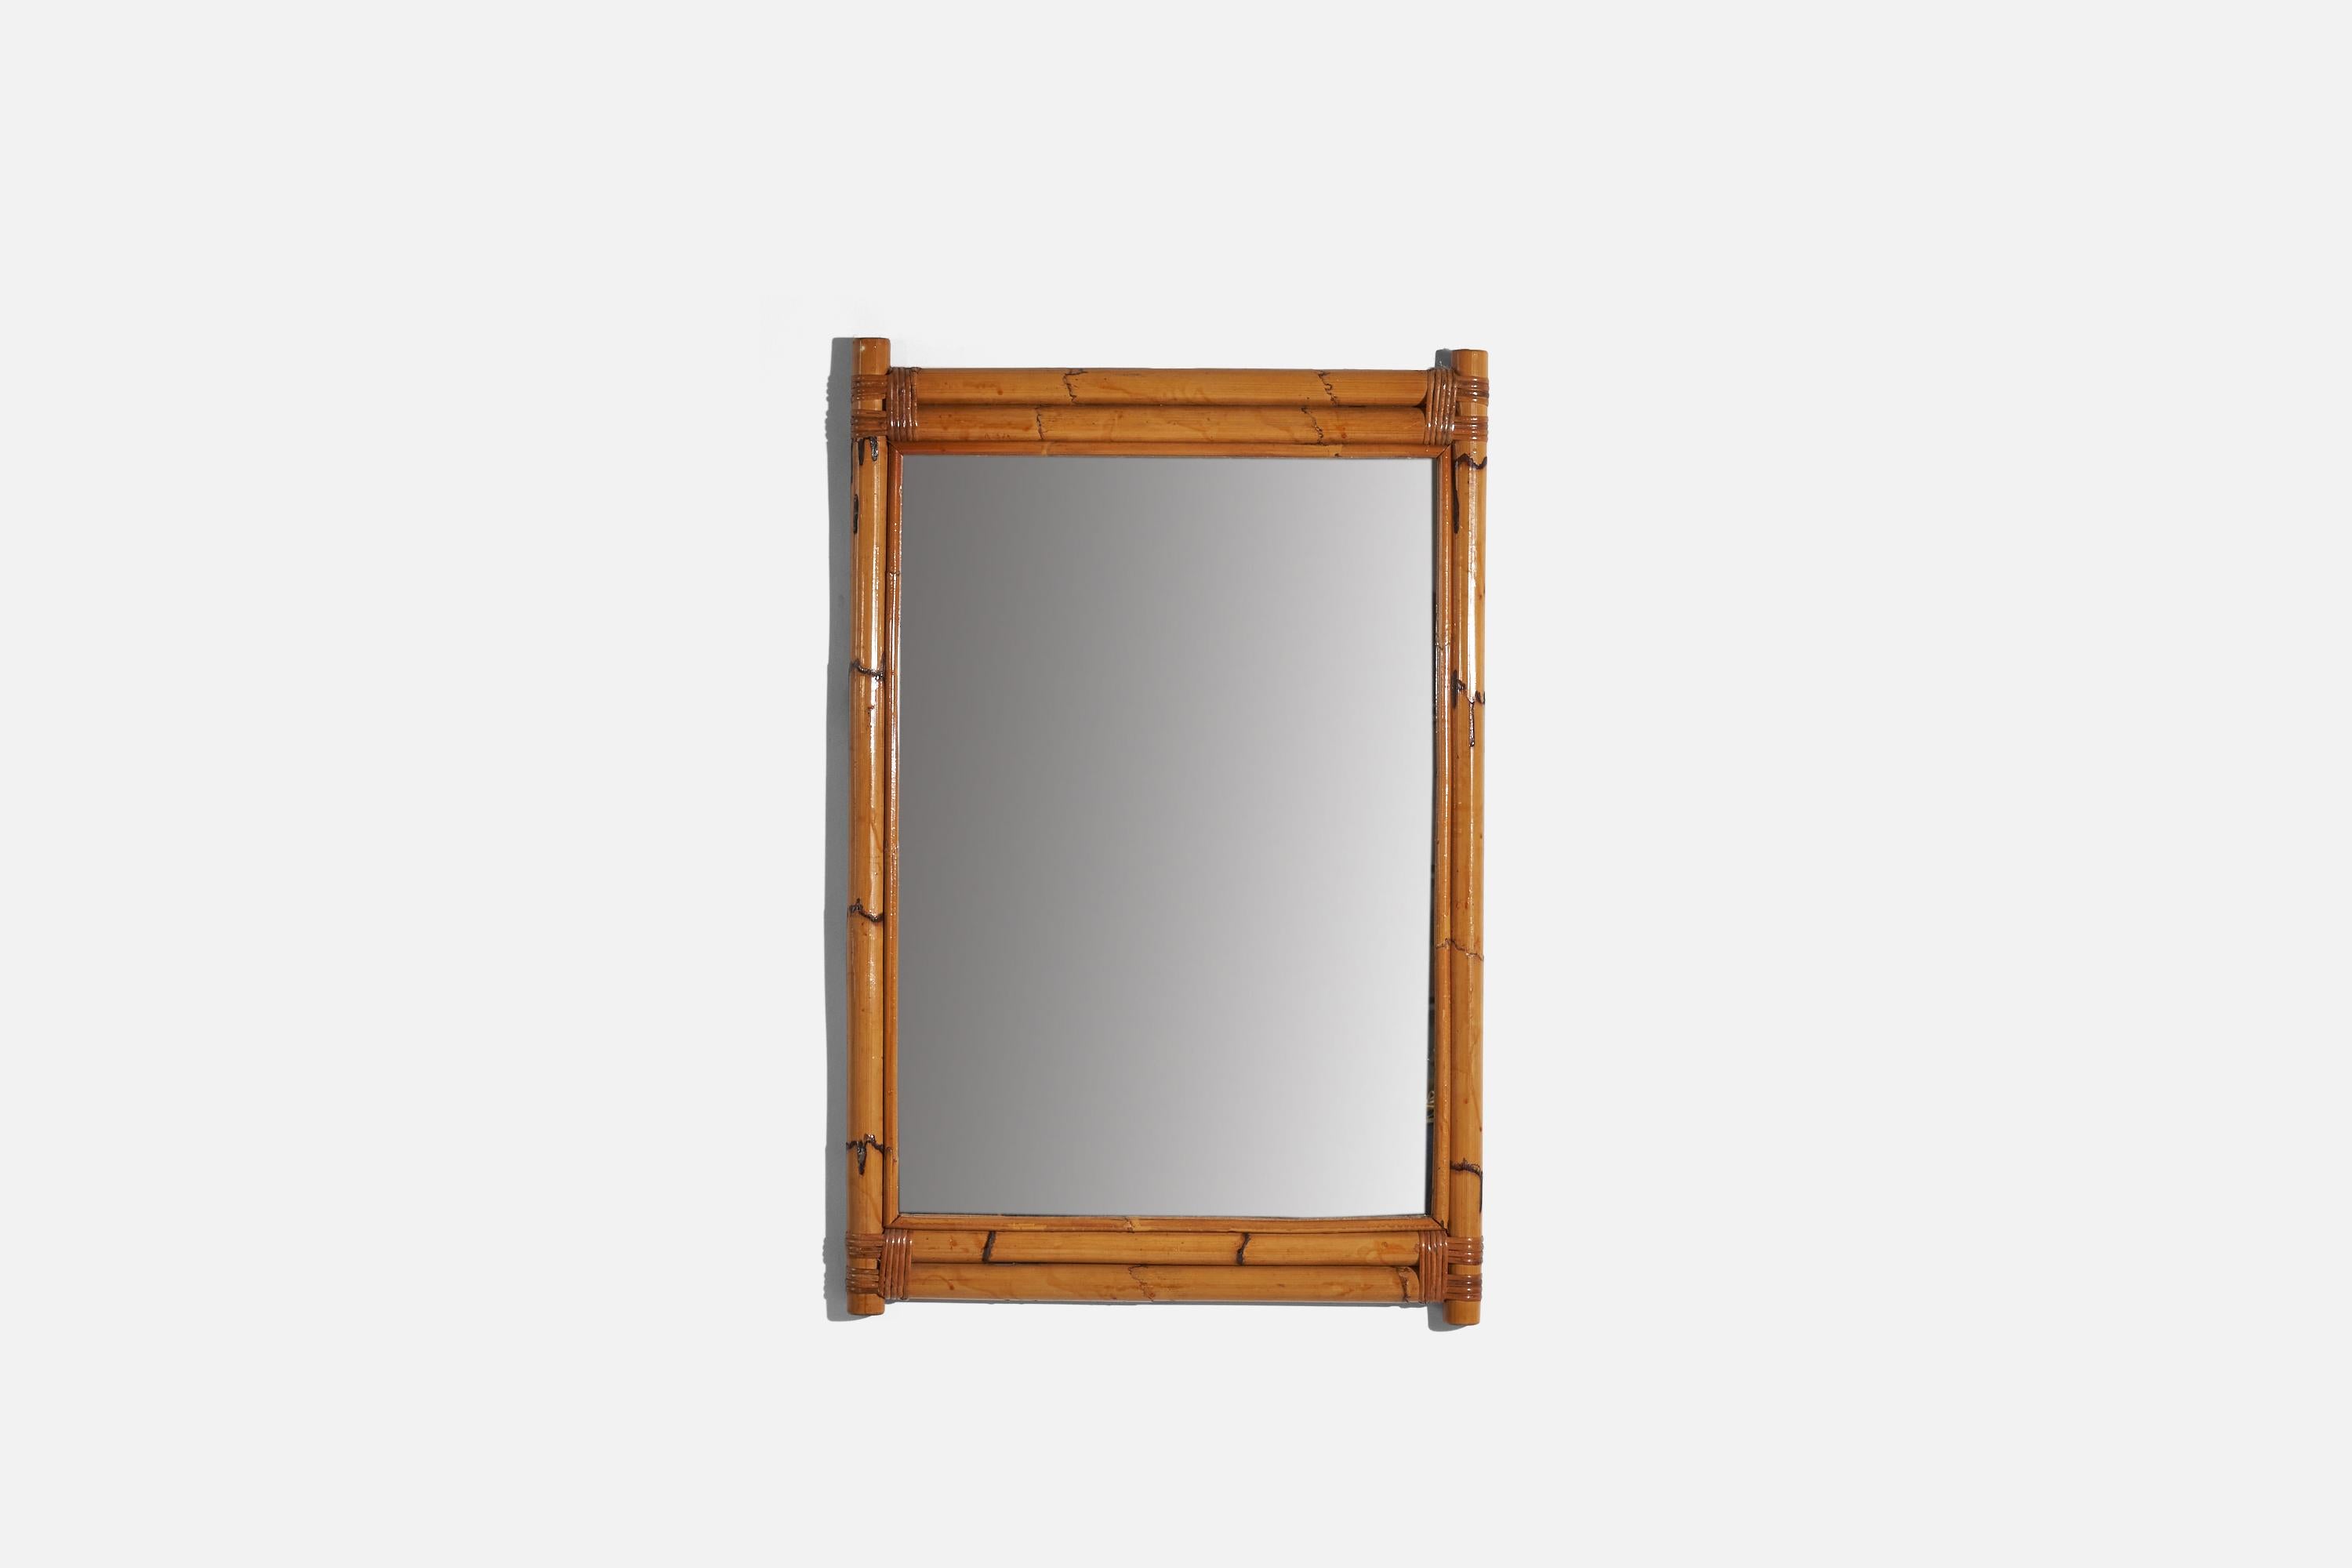 A bamboo and rattan wall mirror designed and produced in Italy, c. 1950s.